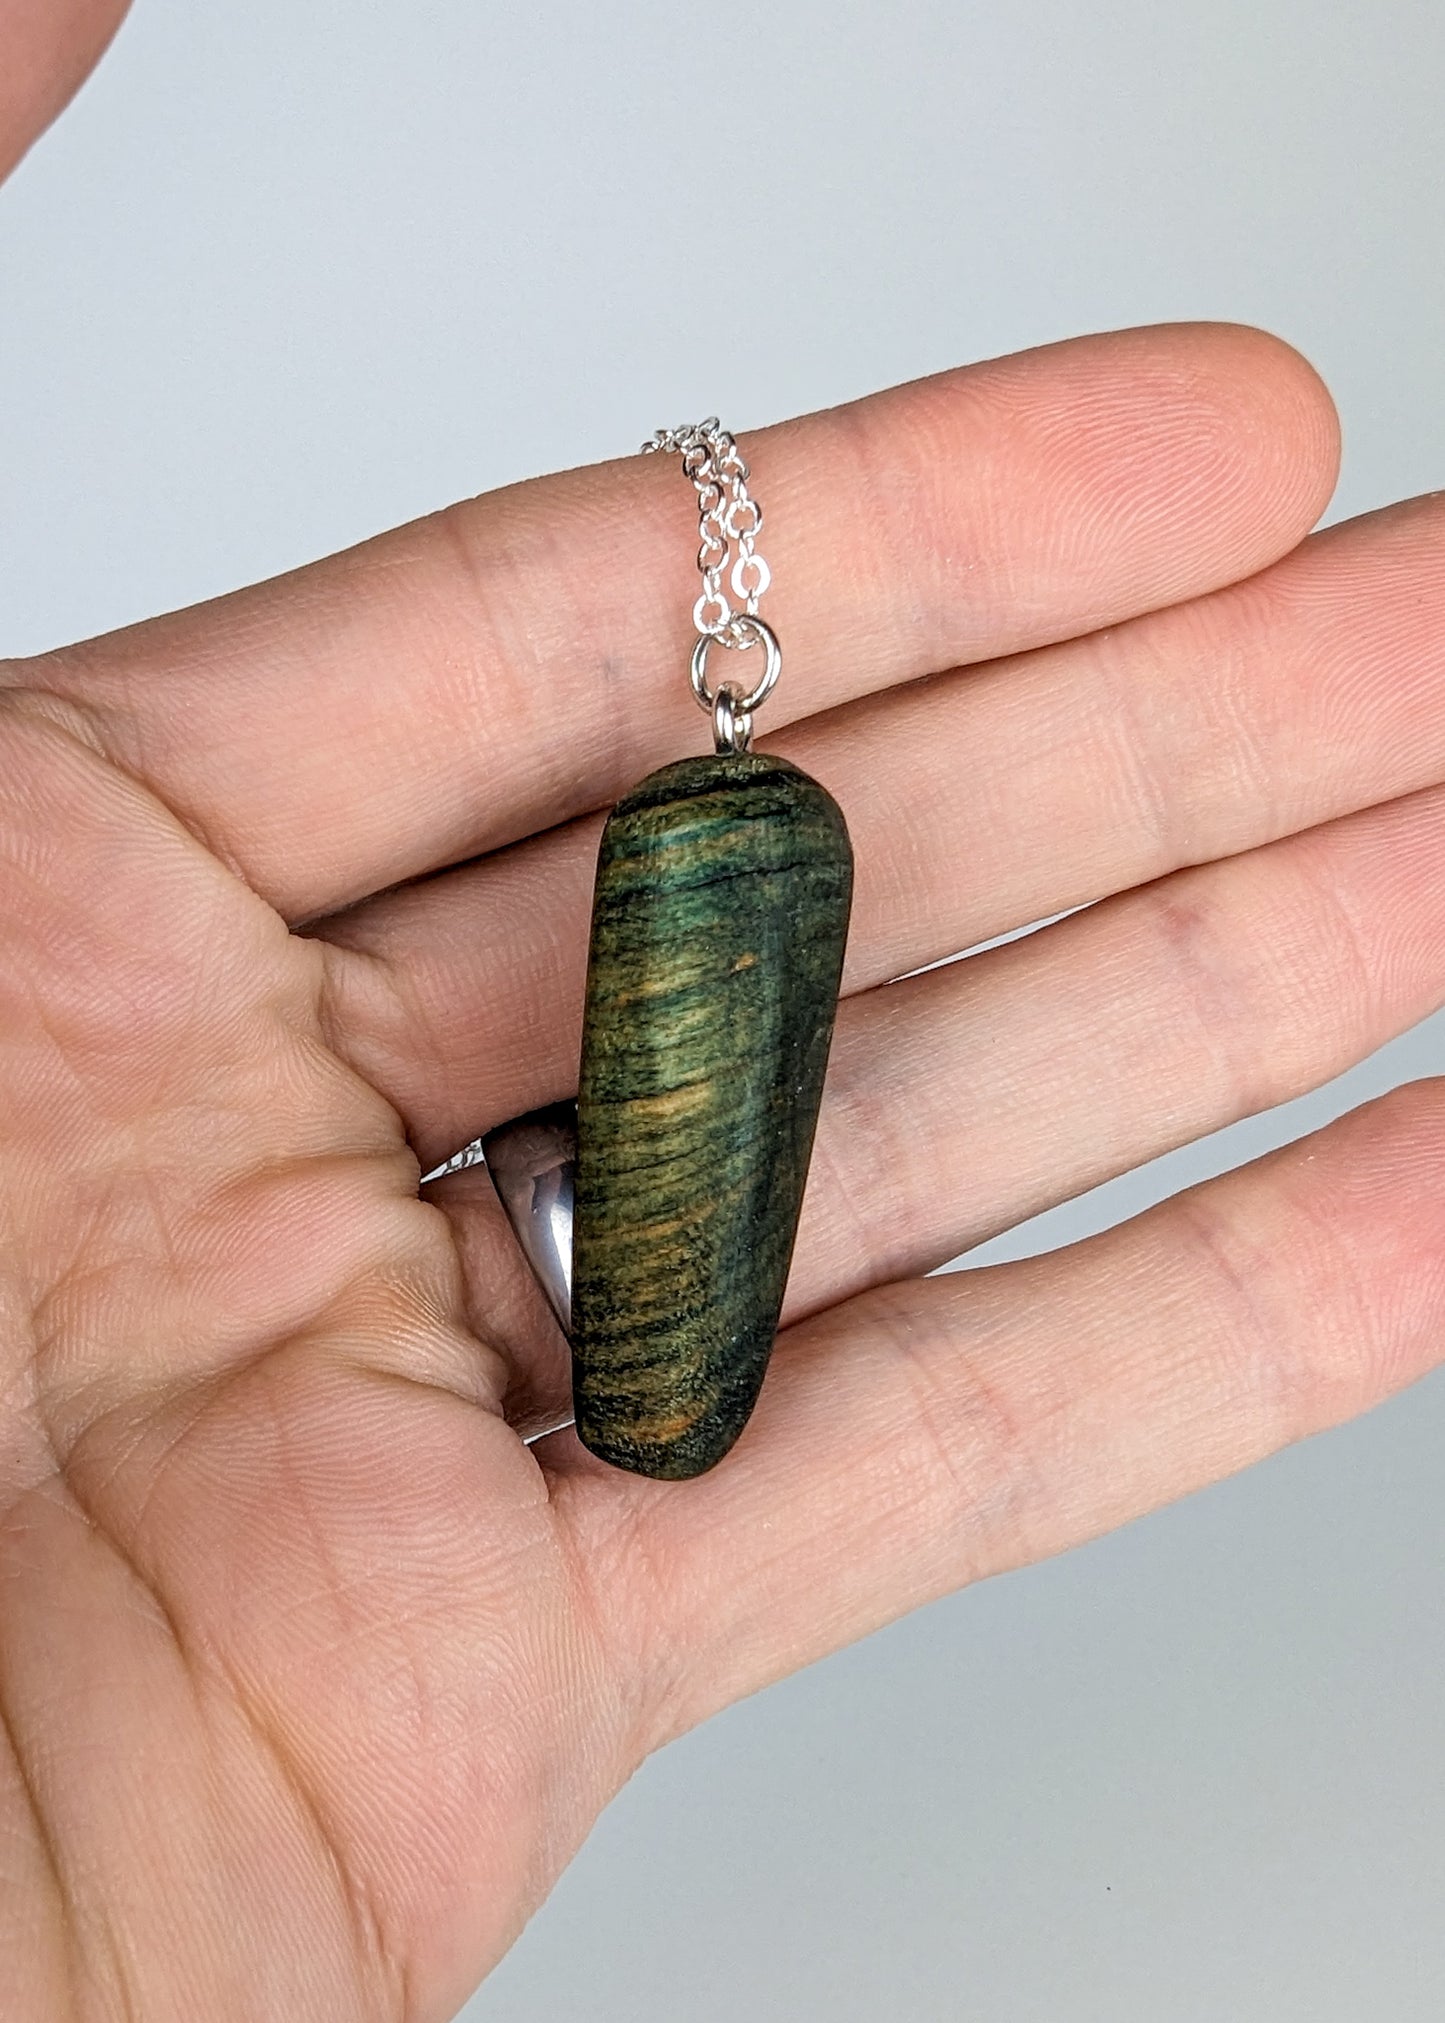 Naturally Fungus-Stained Wooden Pendant | Rounded Triangle